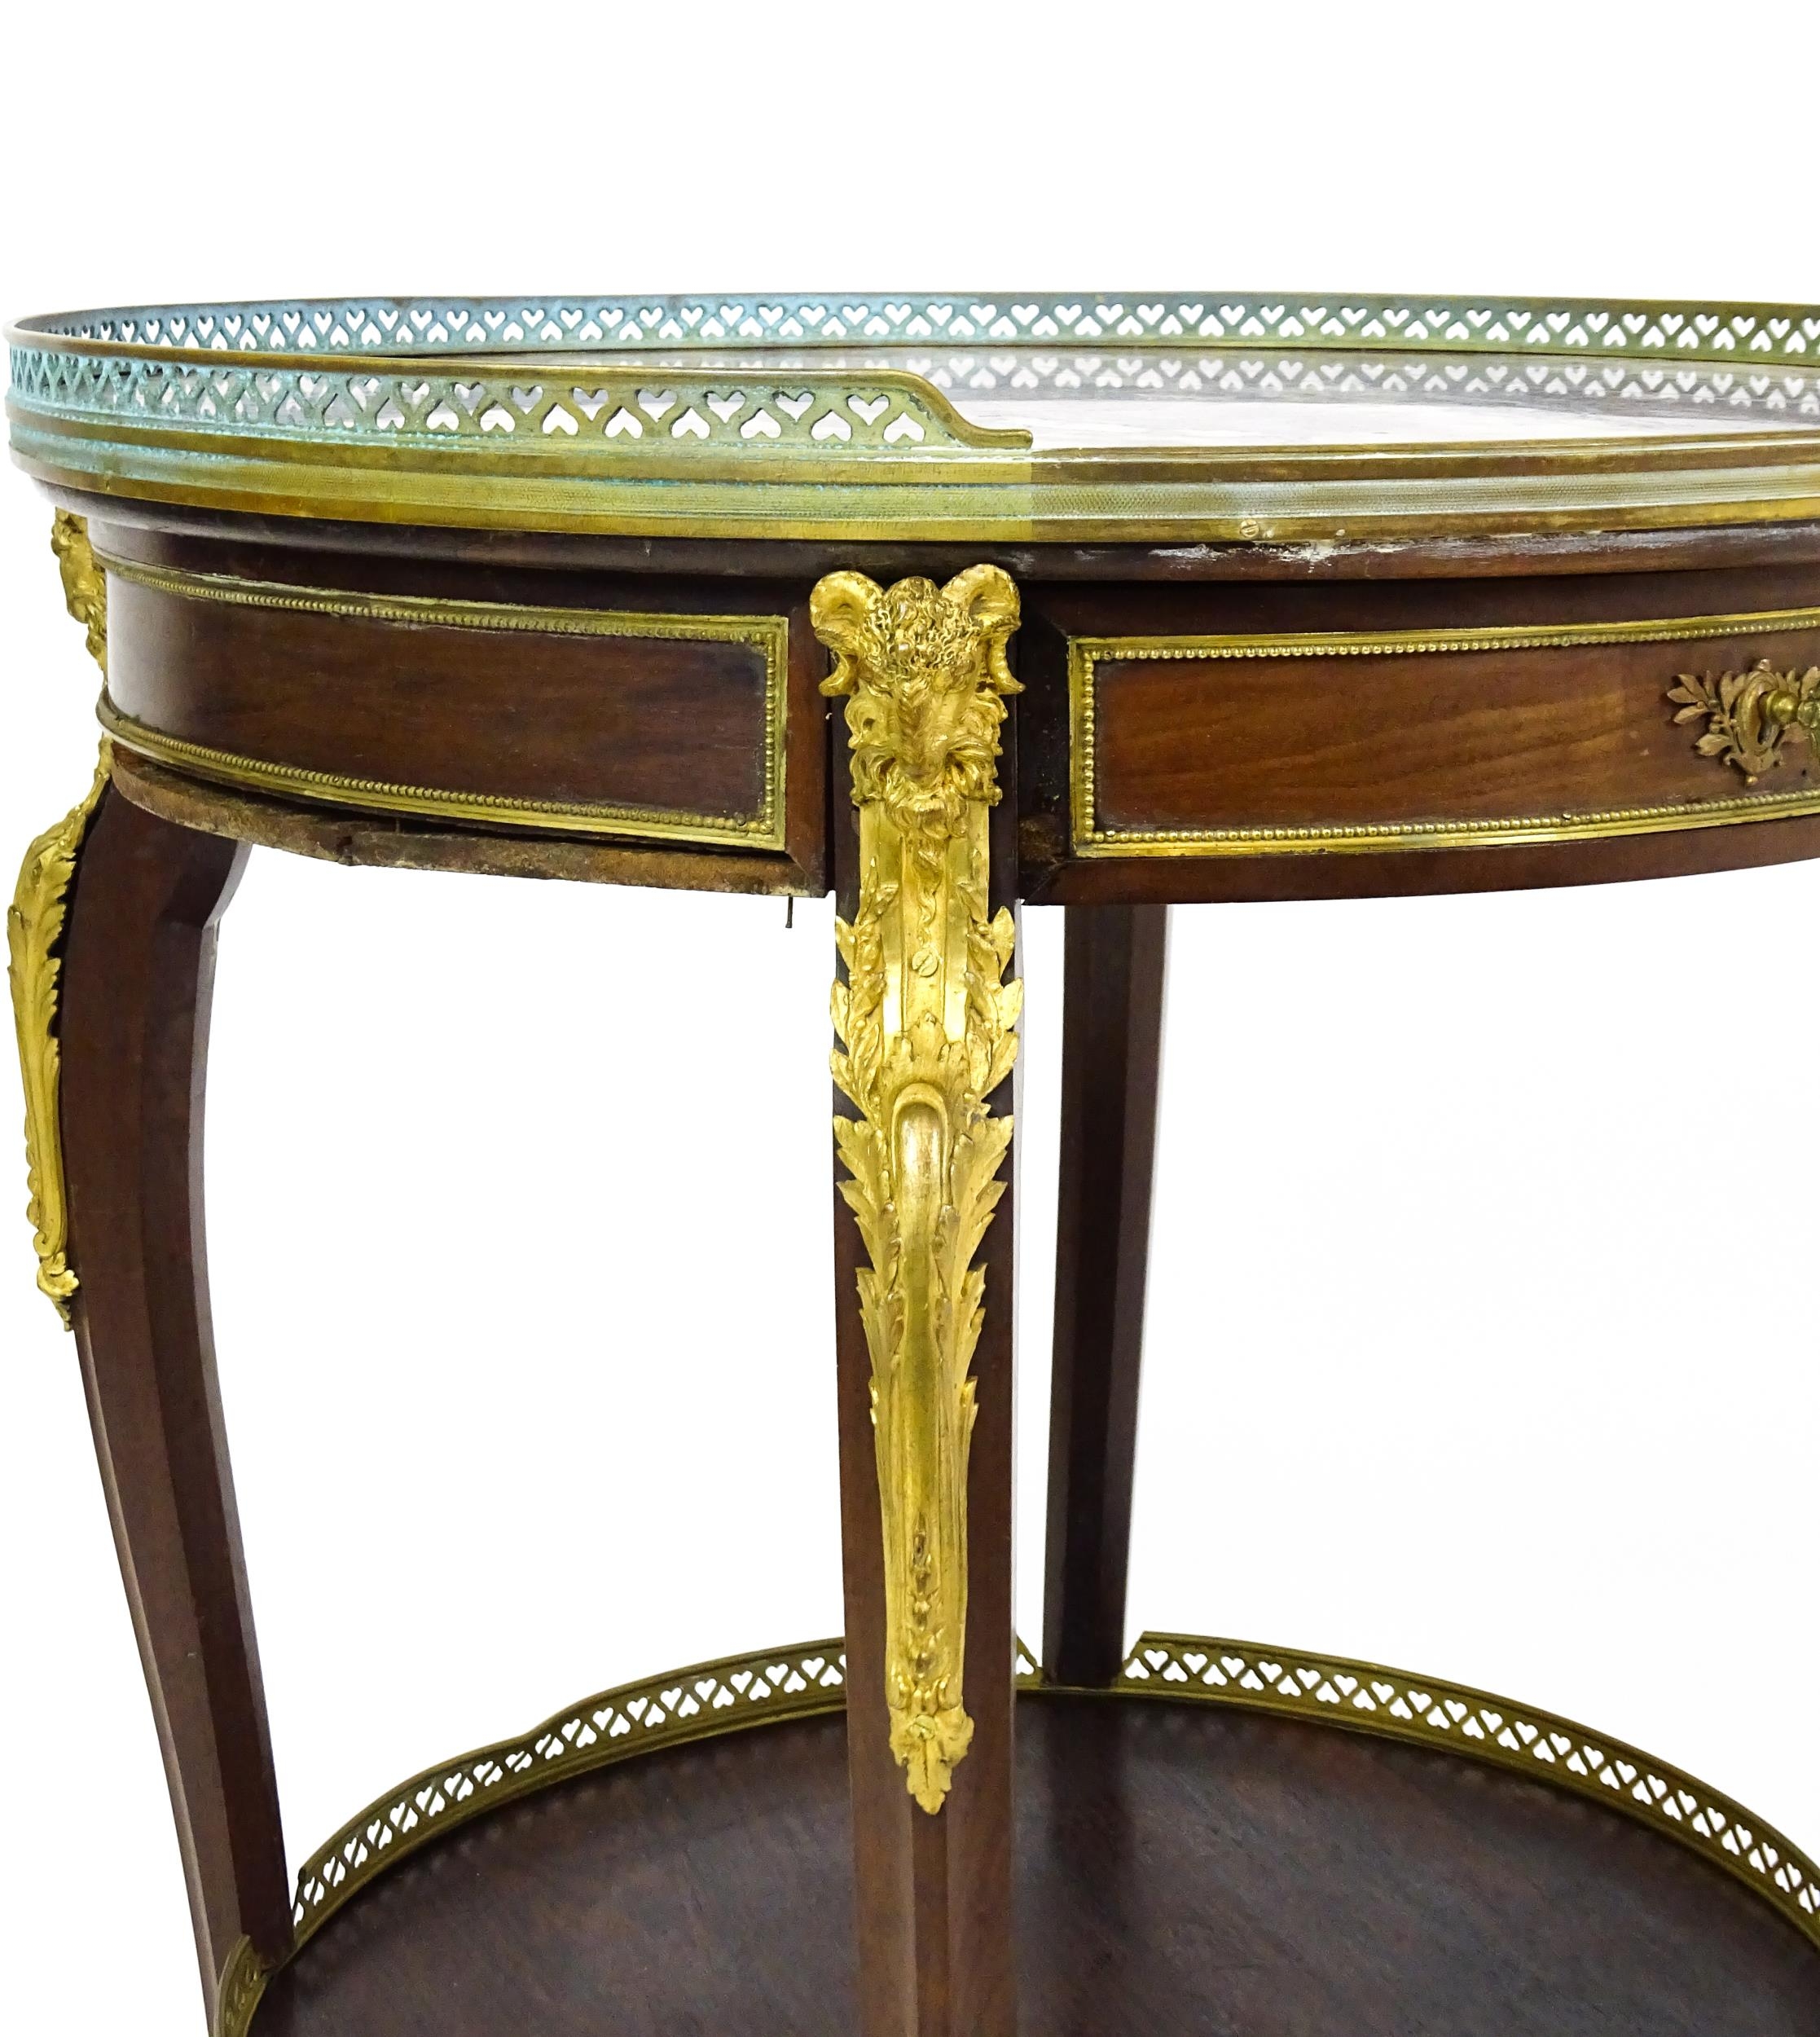 A 19thC rosewood and marble topped side table surmounted by a pierced surround and having a single - Image 10 of 10